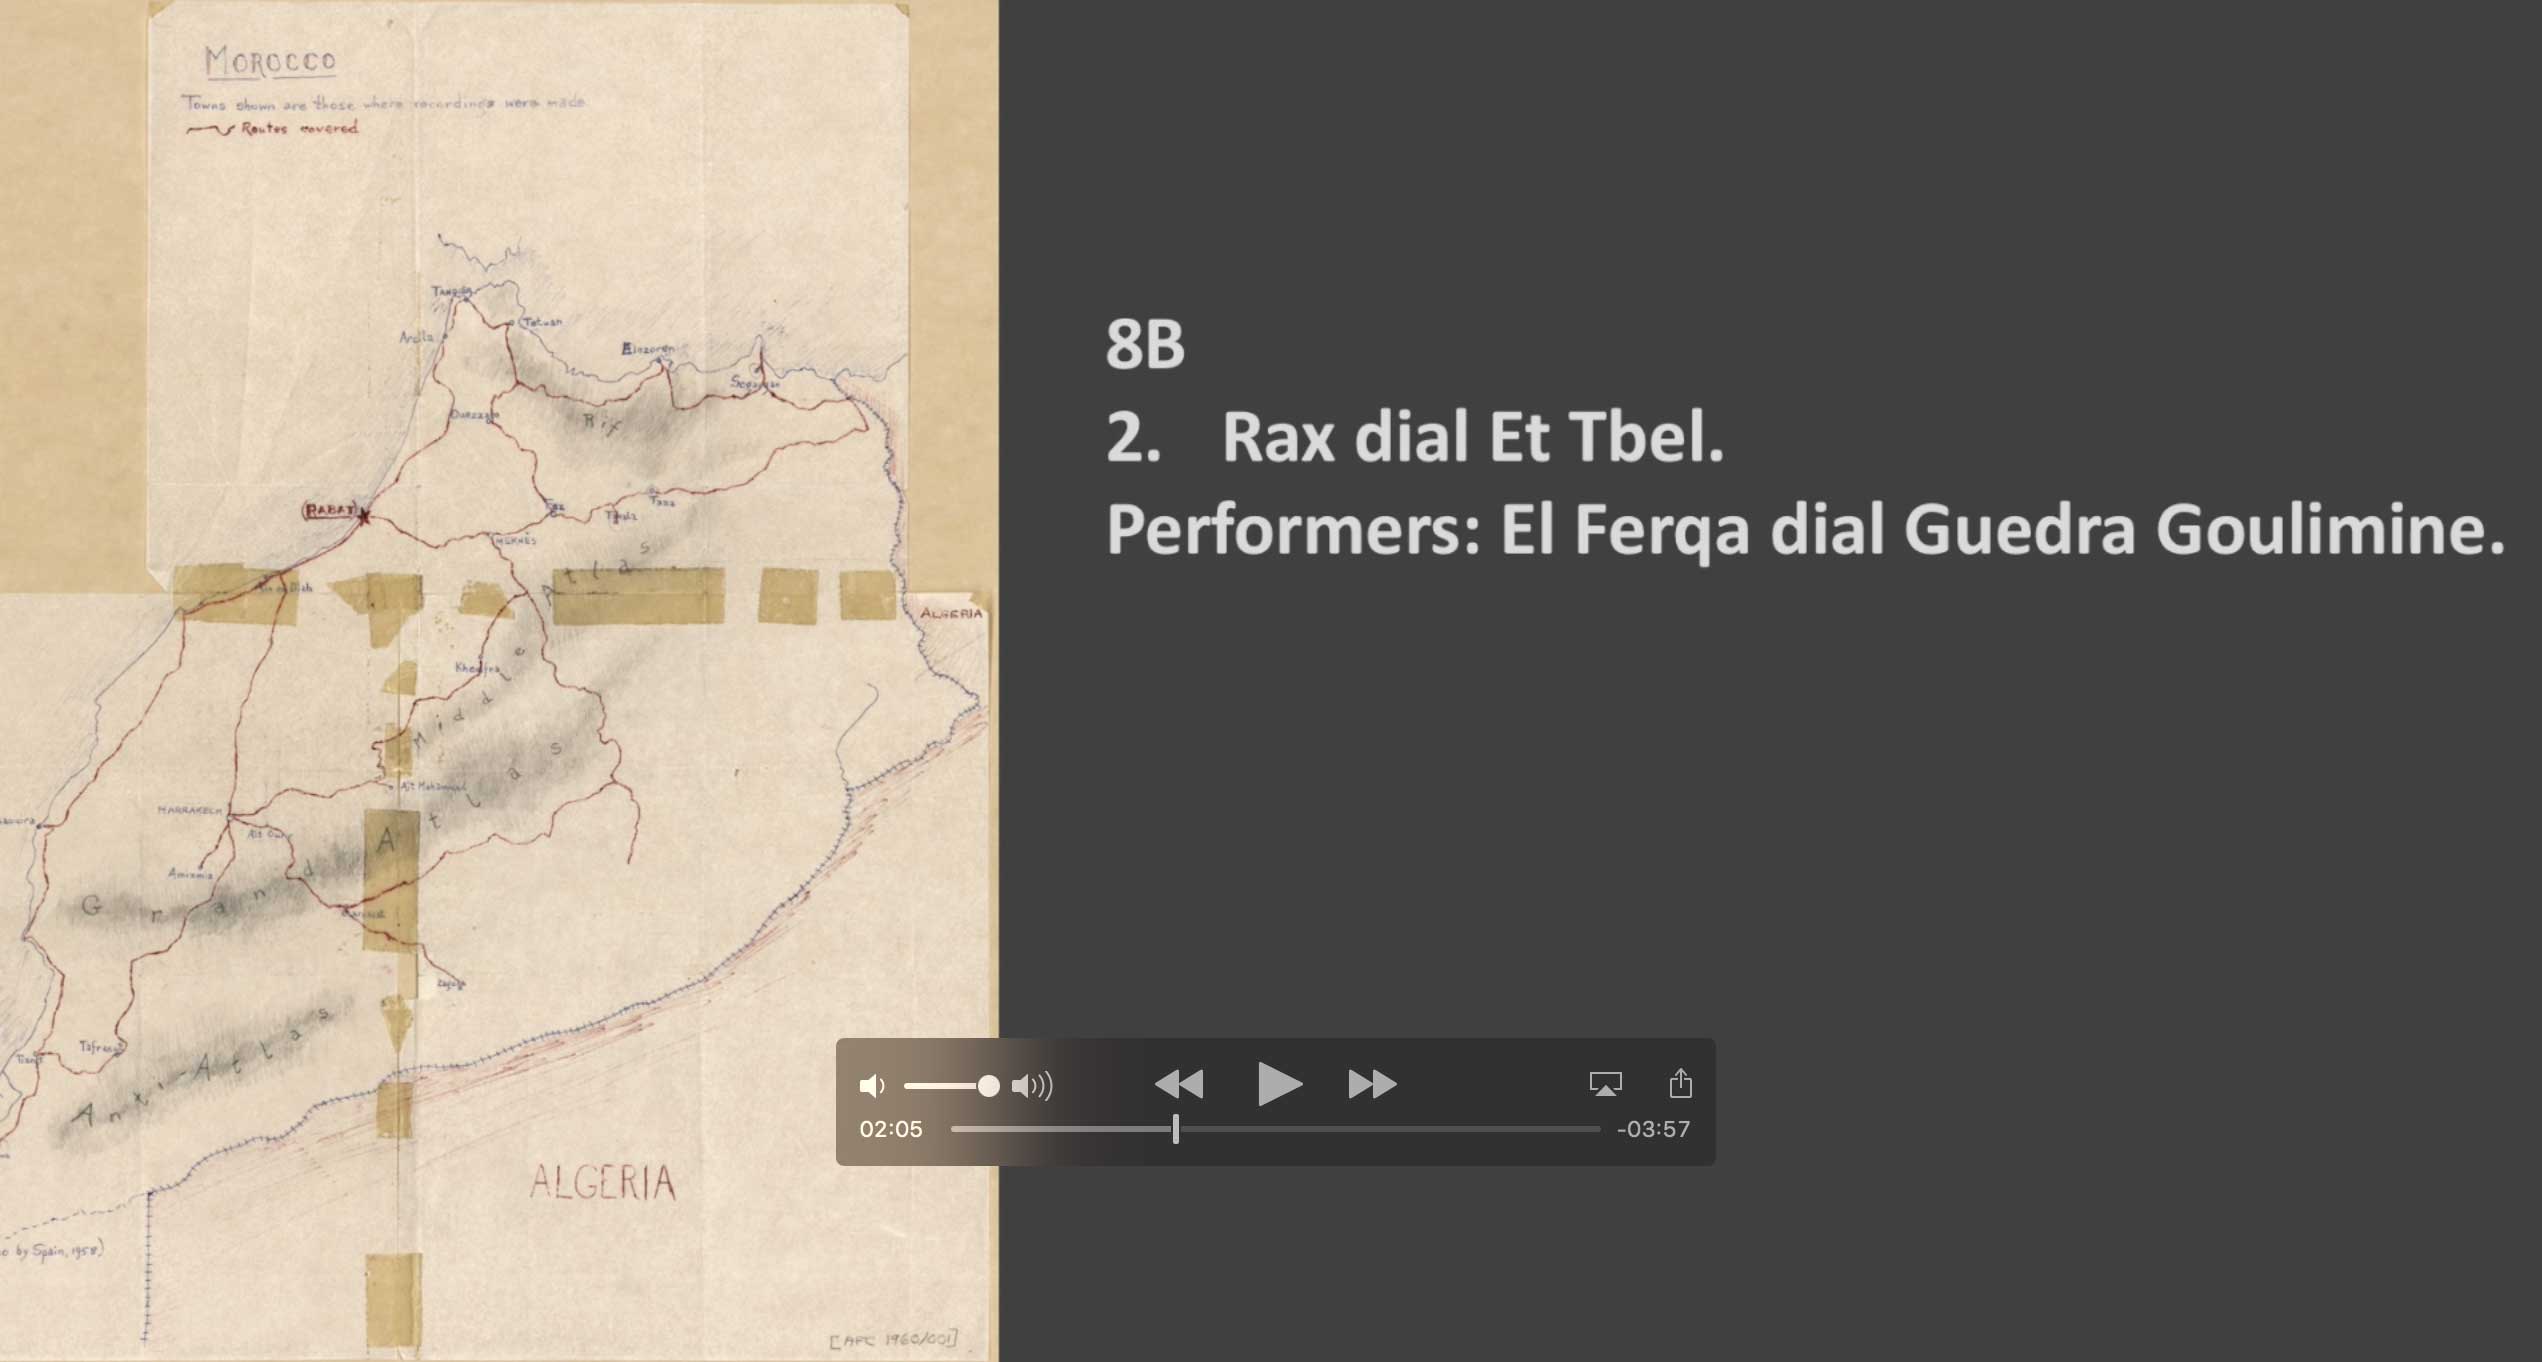 El Ferqa dial Guedra  - 8B Track 2 Rax dial Et Tbel
Performers: El Ferqa dial Guedra Goulimine 

Recorded by Paul Bowles at Goulimine, Moroccan Sahara.
August 12, 1959
